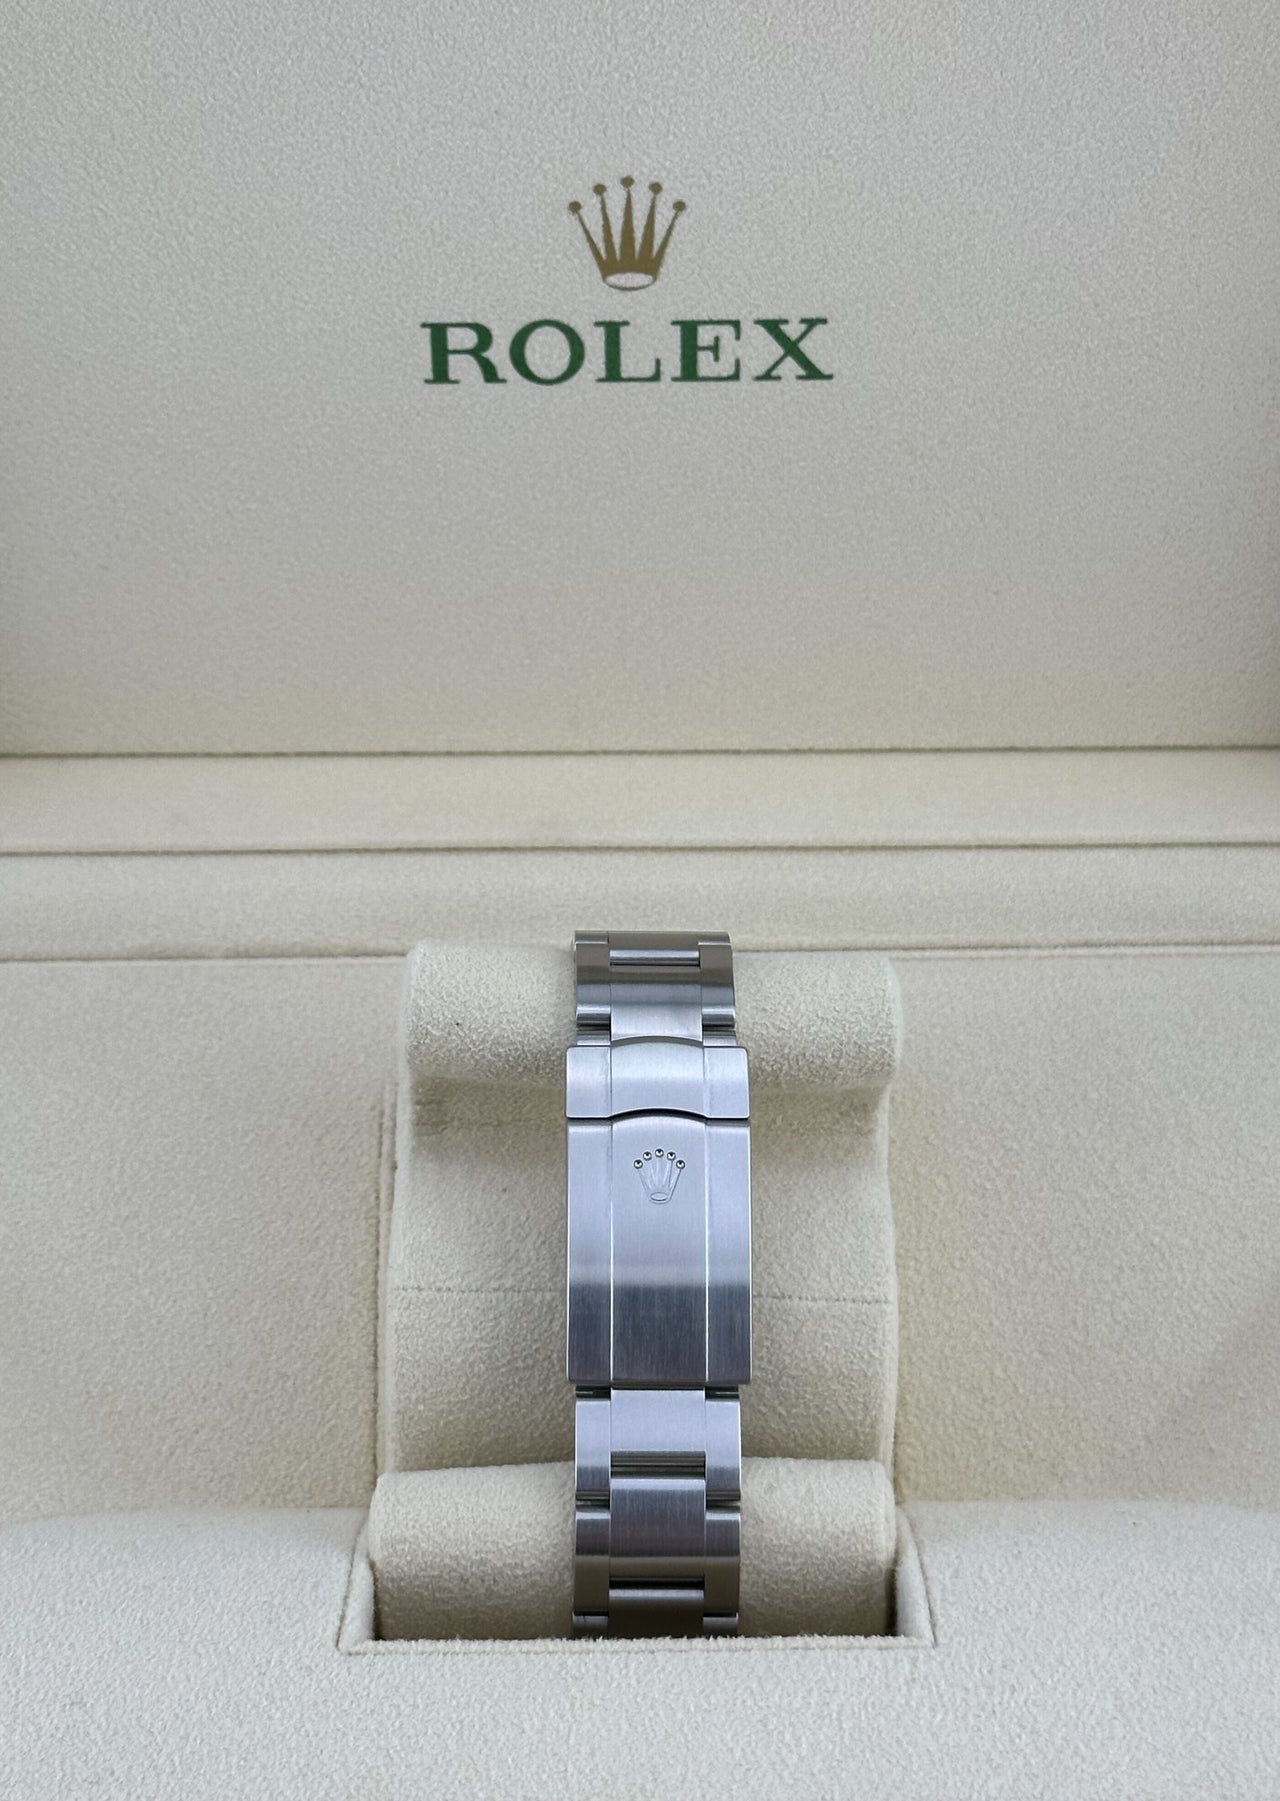 Rolex Oyster Perpetual 126000 Stainless Steel Coral Red Dial